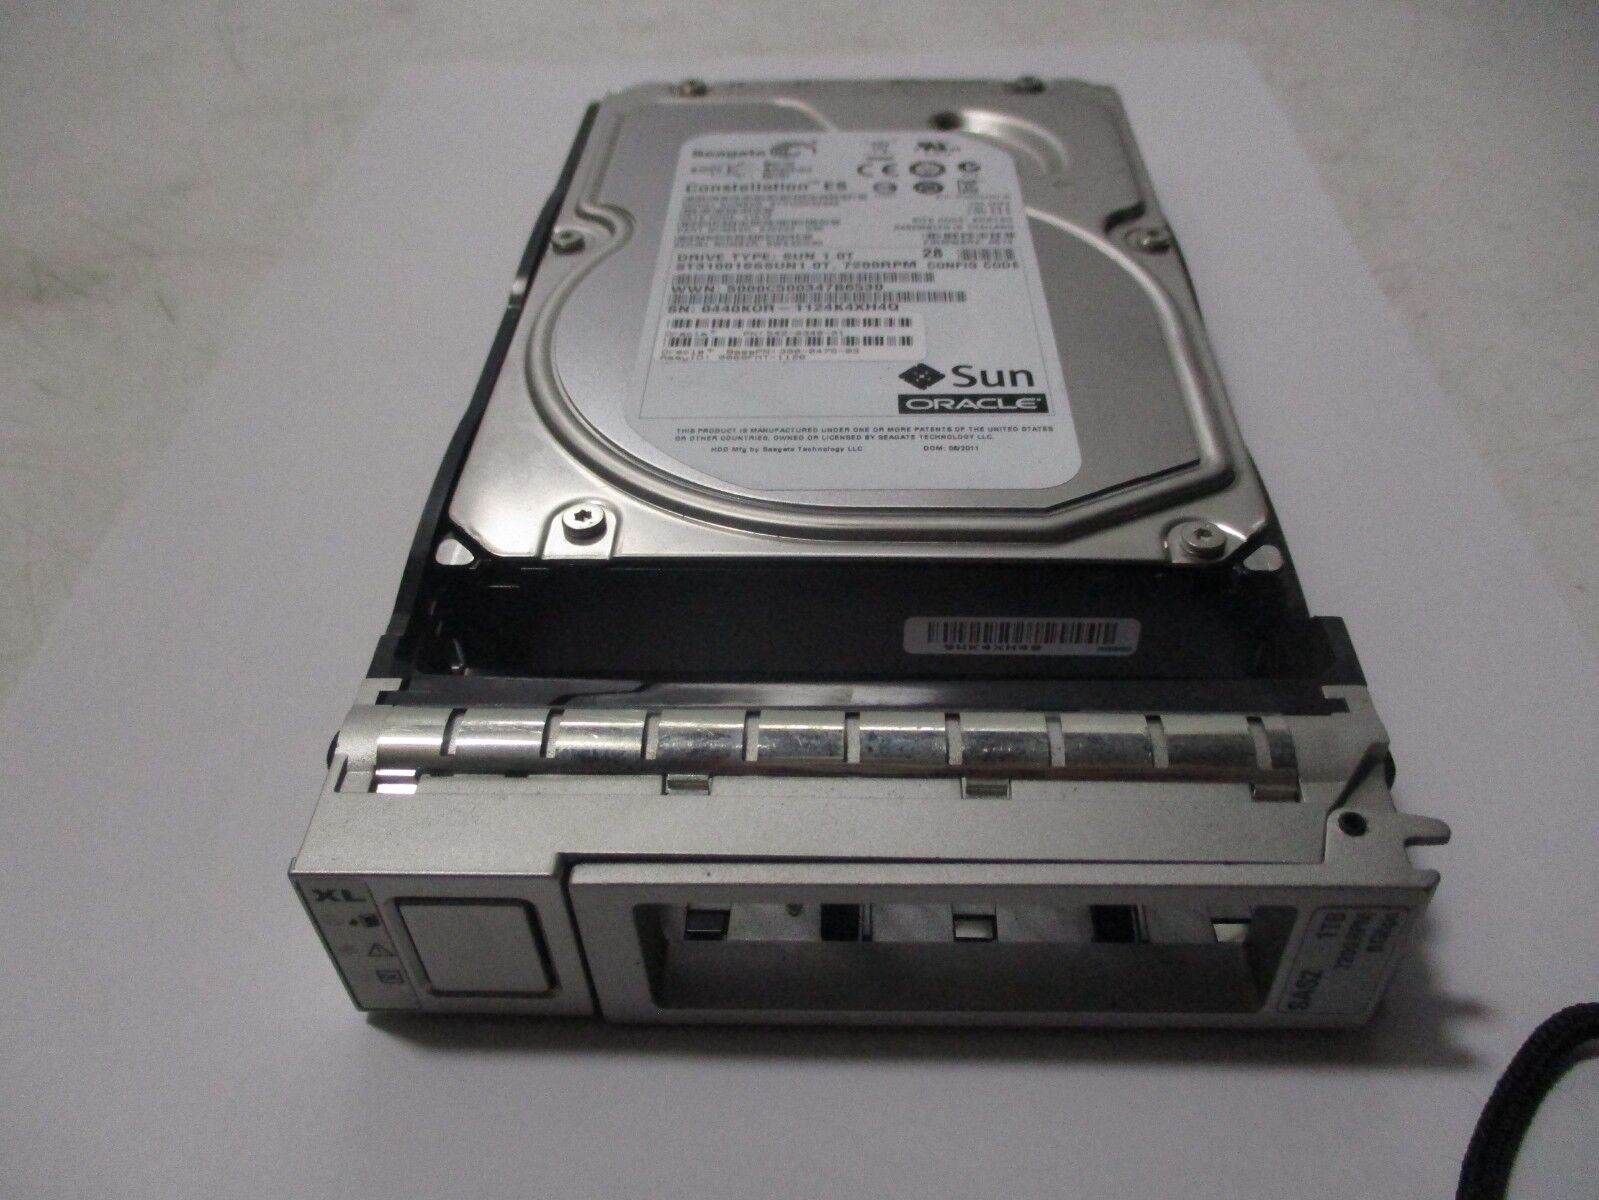 SUN ORACLE 542-0340-01 390-0475-03 Fixed price for sale 9JX244-045 ST310000424SS FW.0 New Orleans Mall